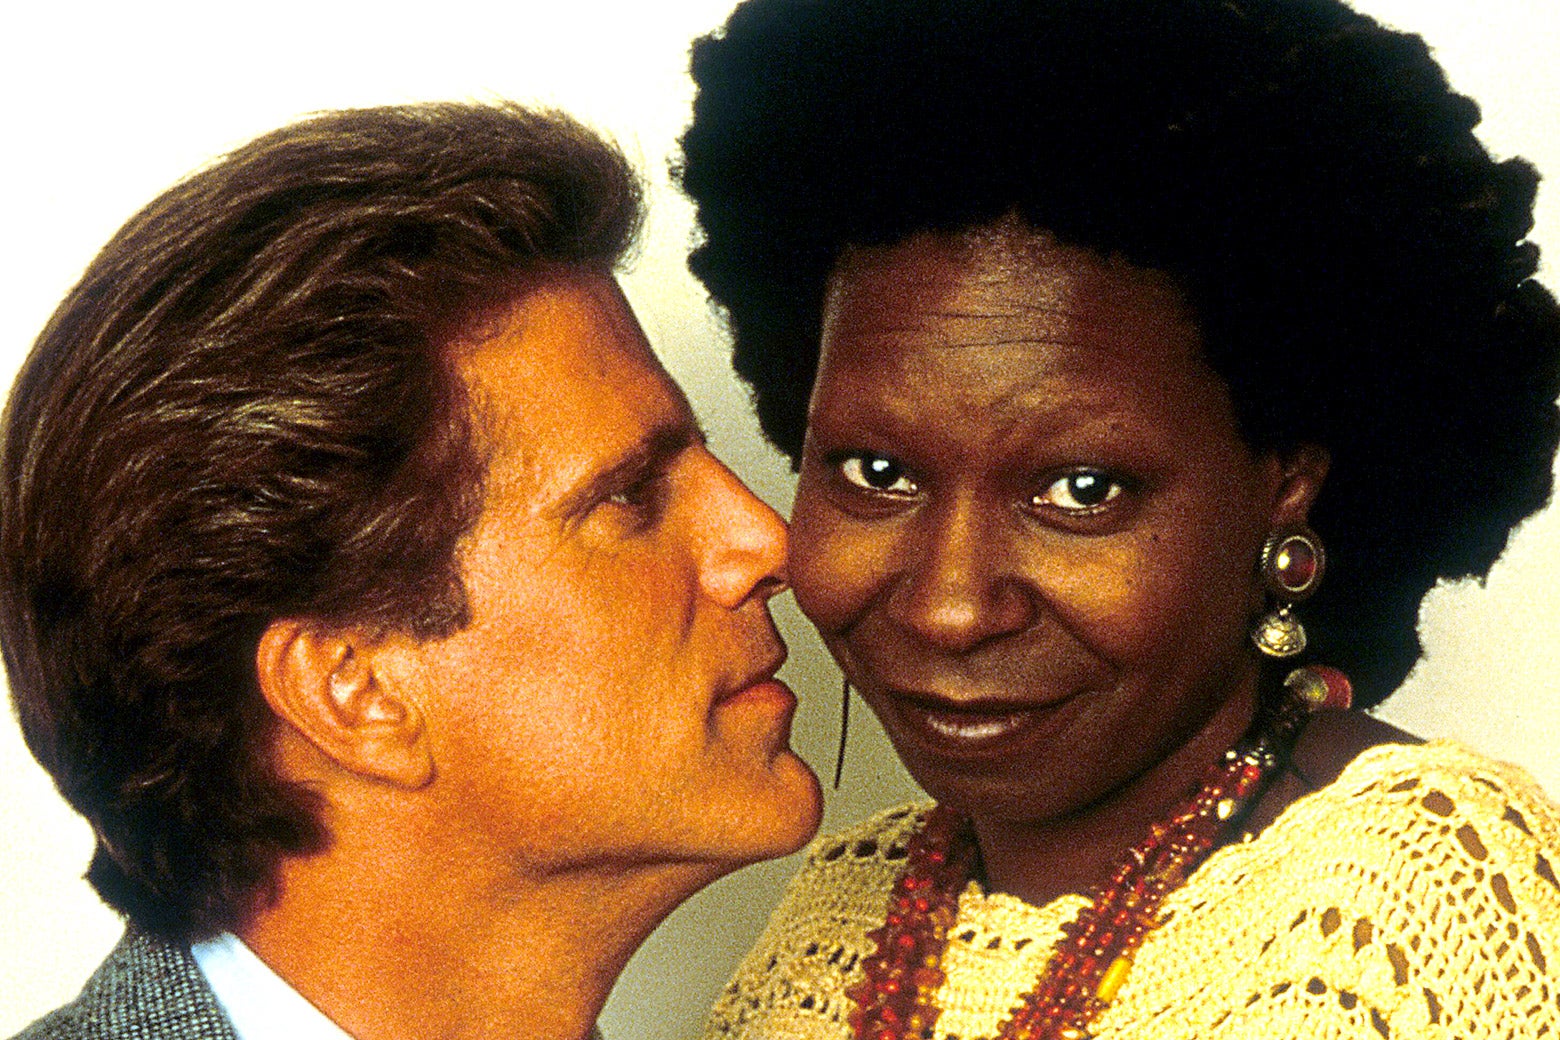 Ted Danson once wore blackface to roast Whoopi Goldberg, and it's striking  to read the coverage of that now.